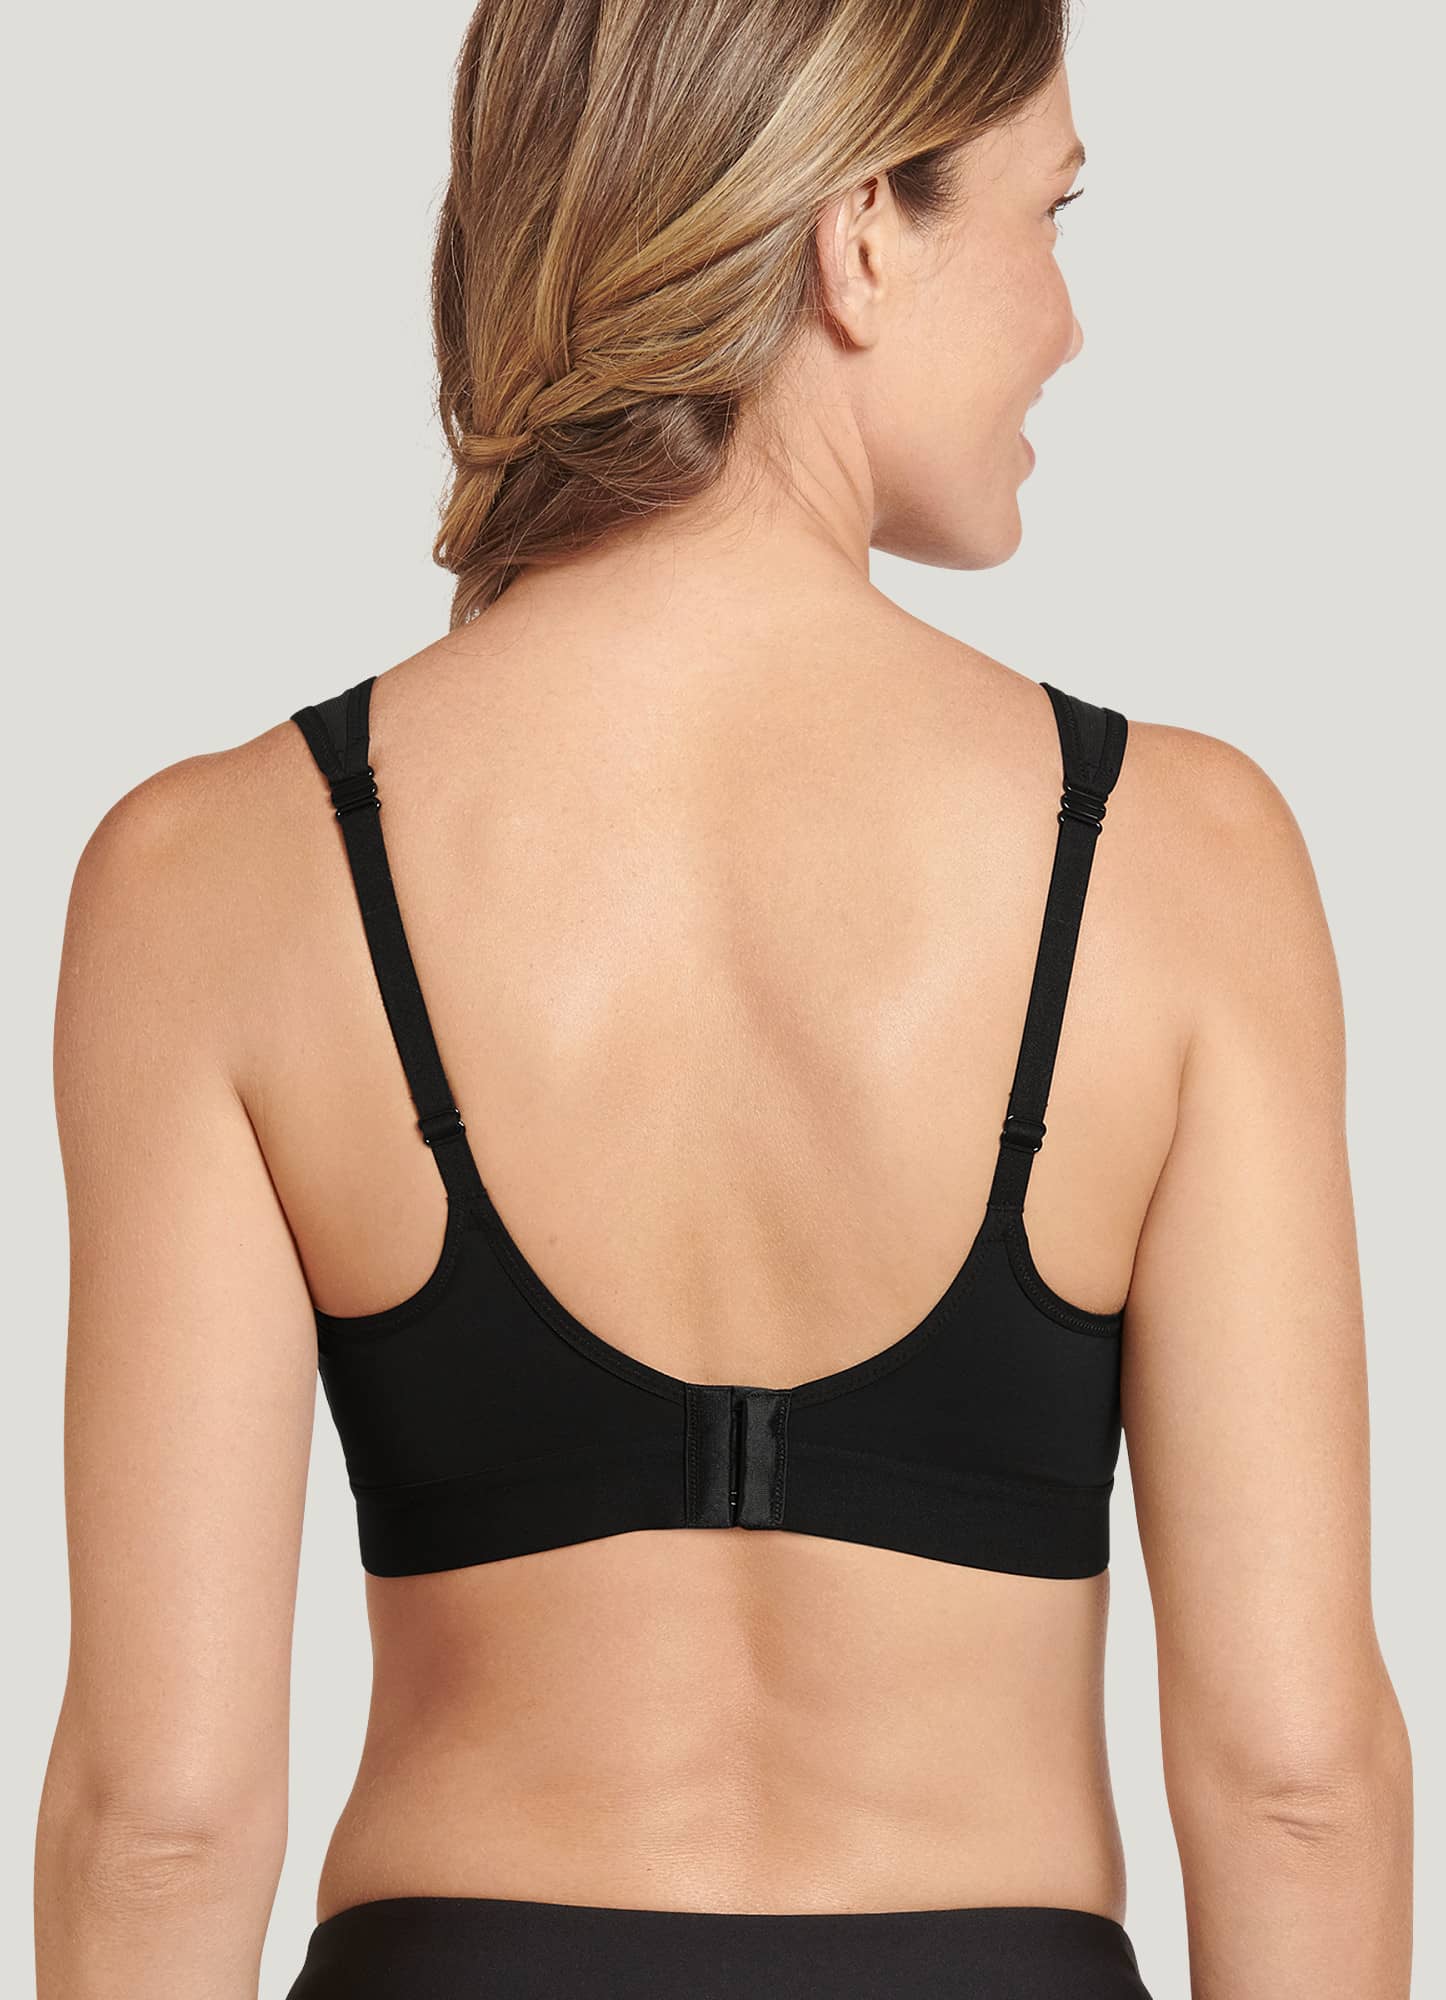 Buy DISOLVE� Women�s Everyday Sports Air Bras Padded Free Size (26 Till 32)  Pack of 1 (C, Black) at